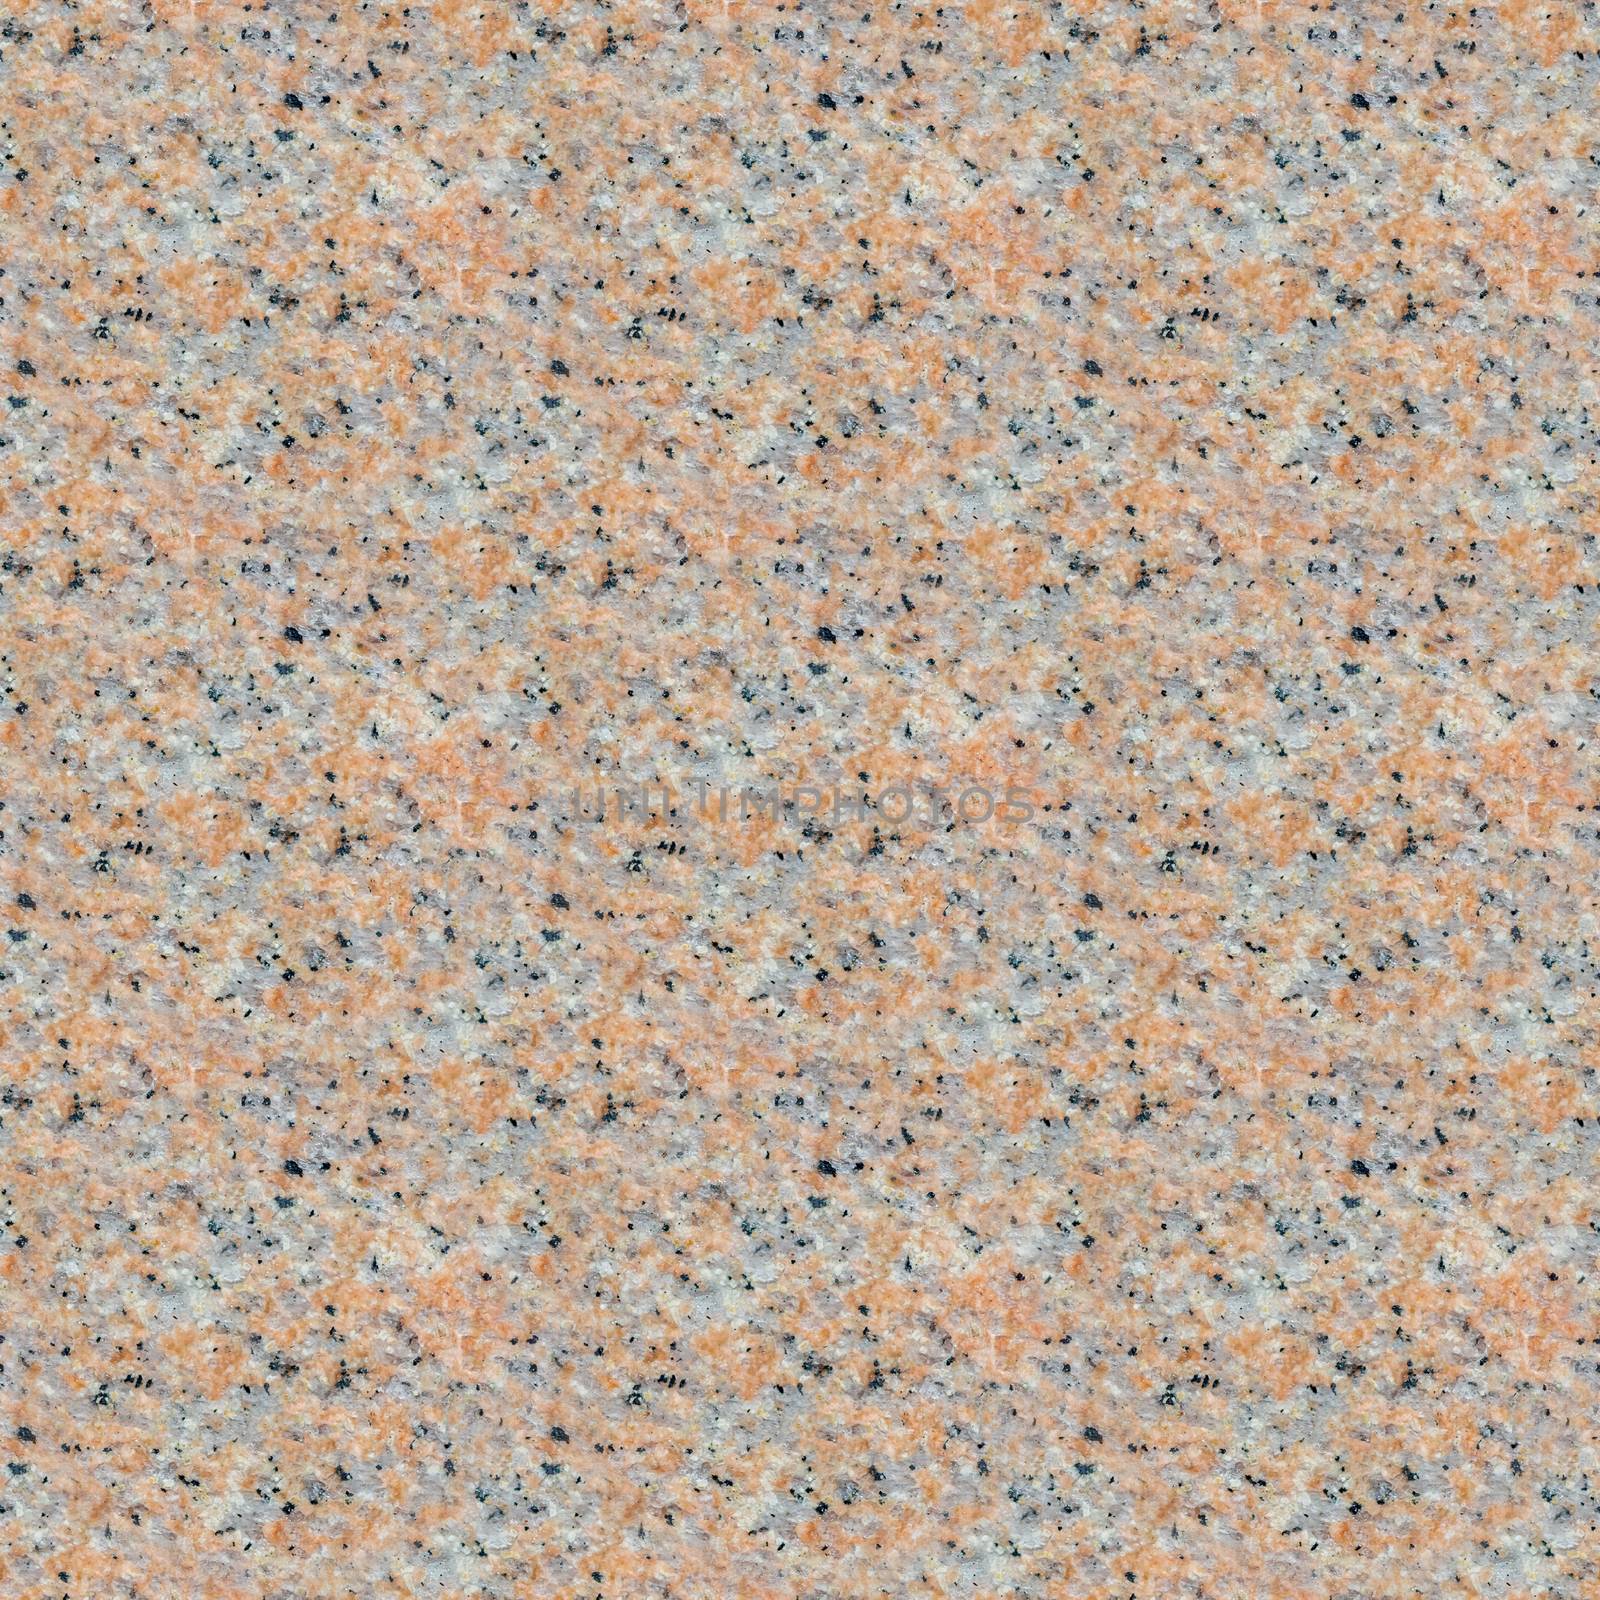 Seamless texture of the surface of natural stone - coral gray granite. Seamless pattern, background - photo, image by galsand